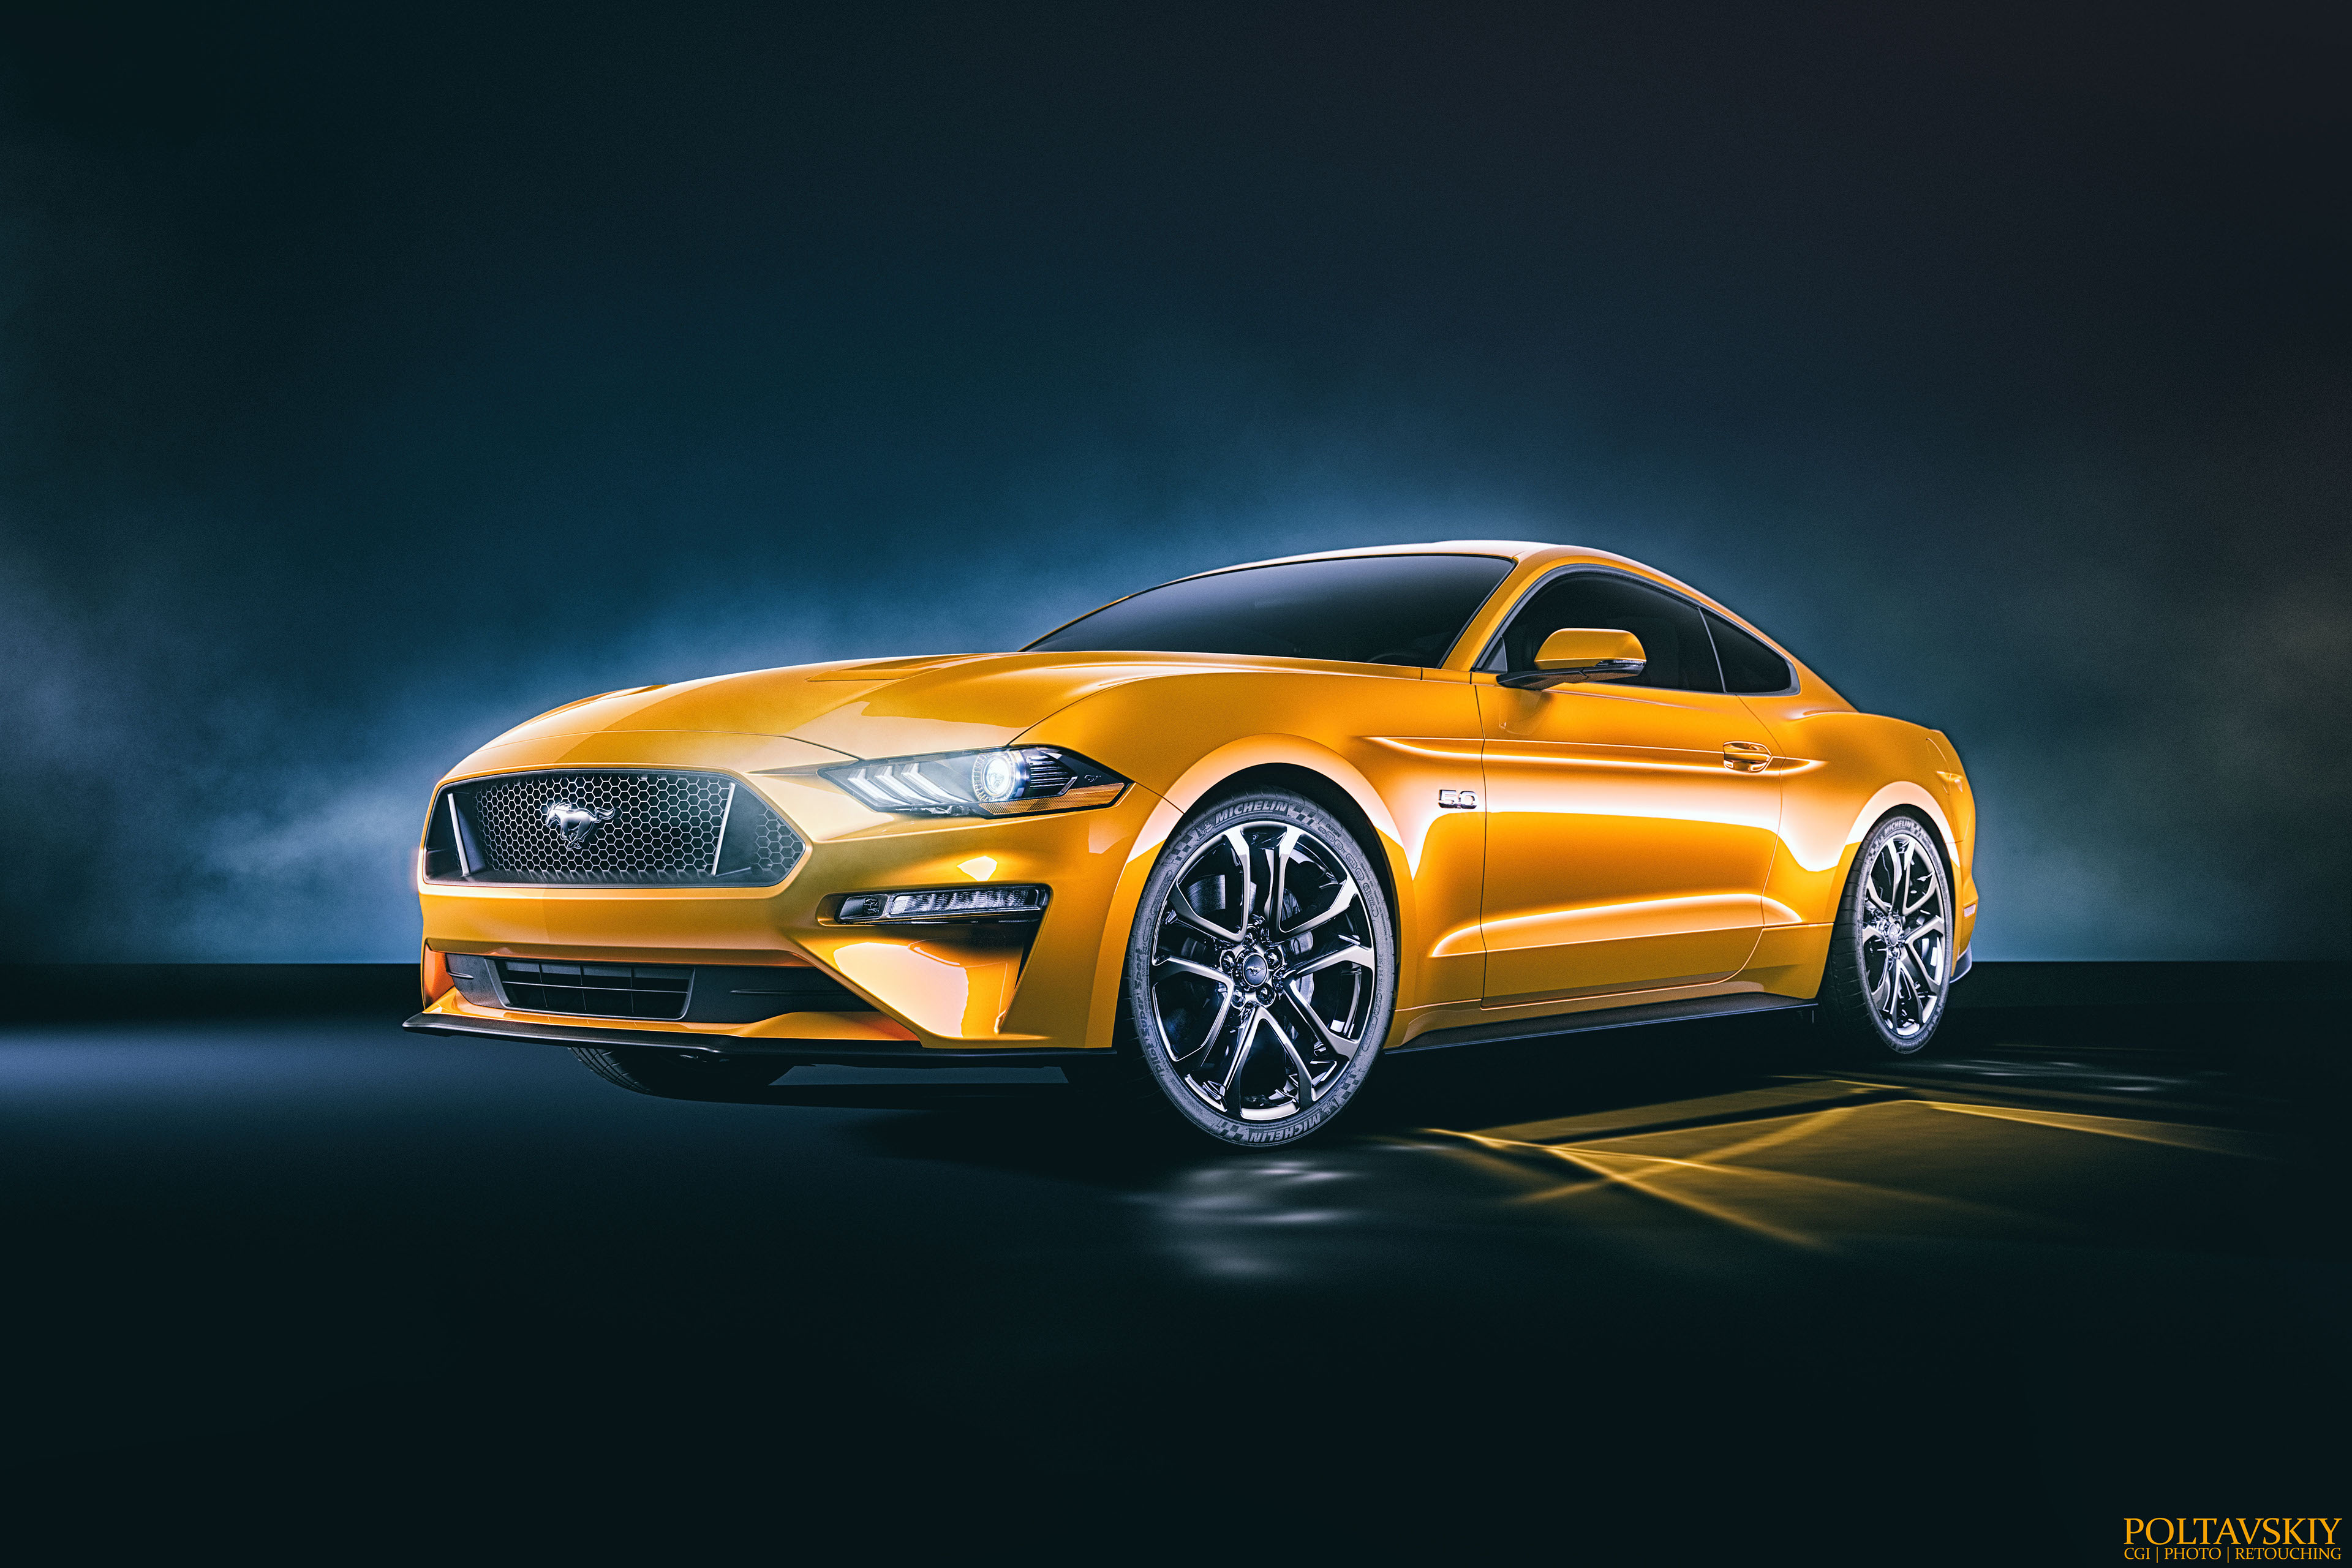 Wallpapers Mustang Ford Behance on the desktop